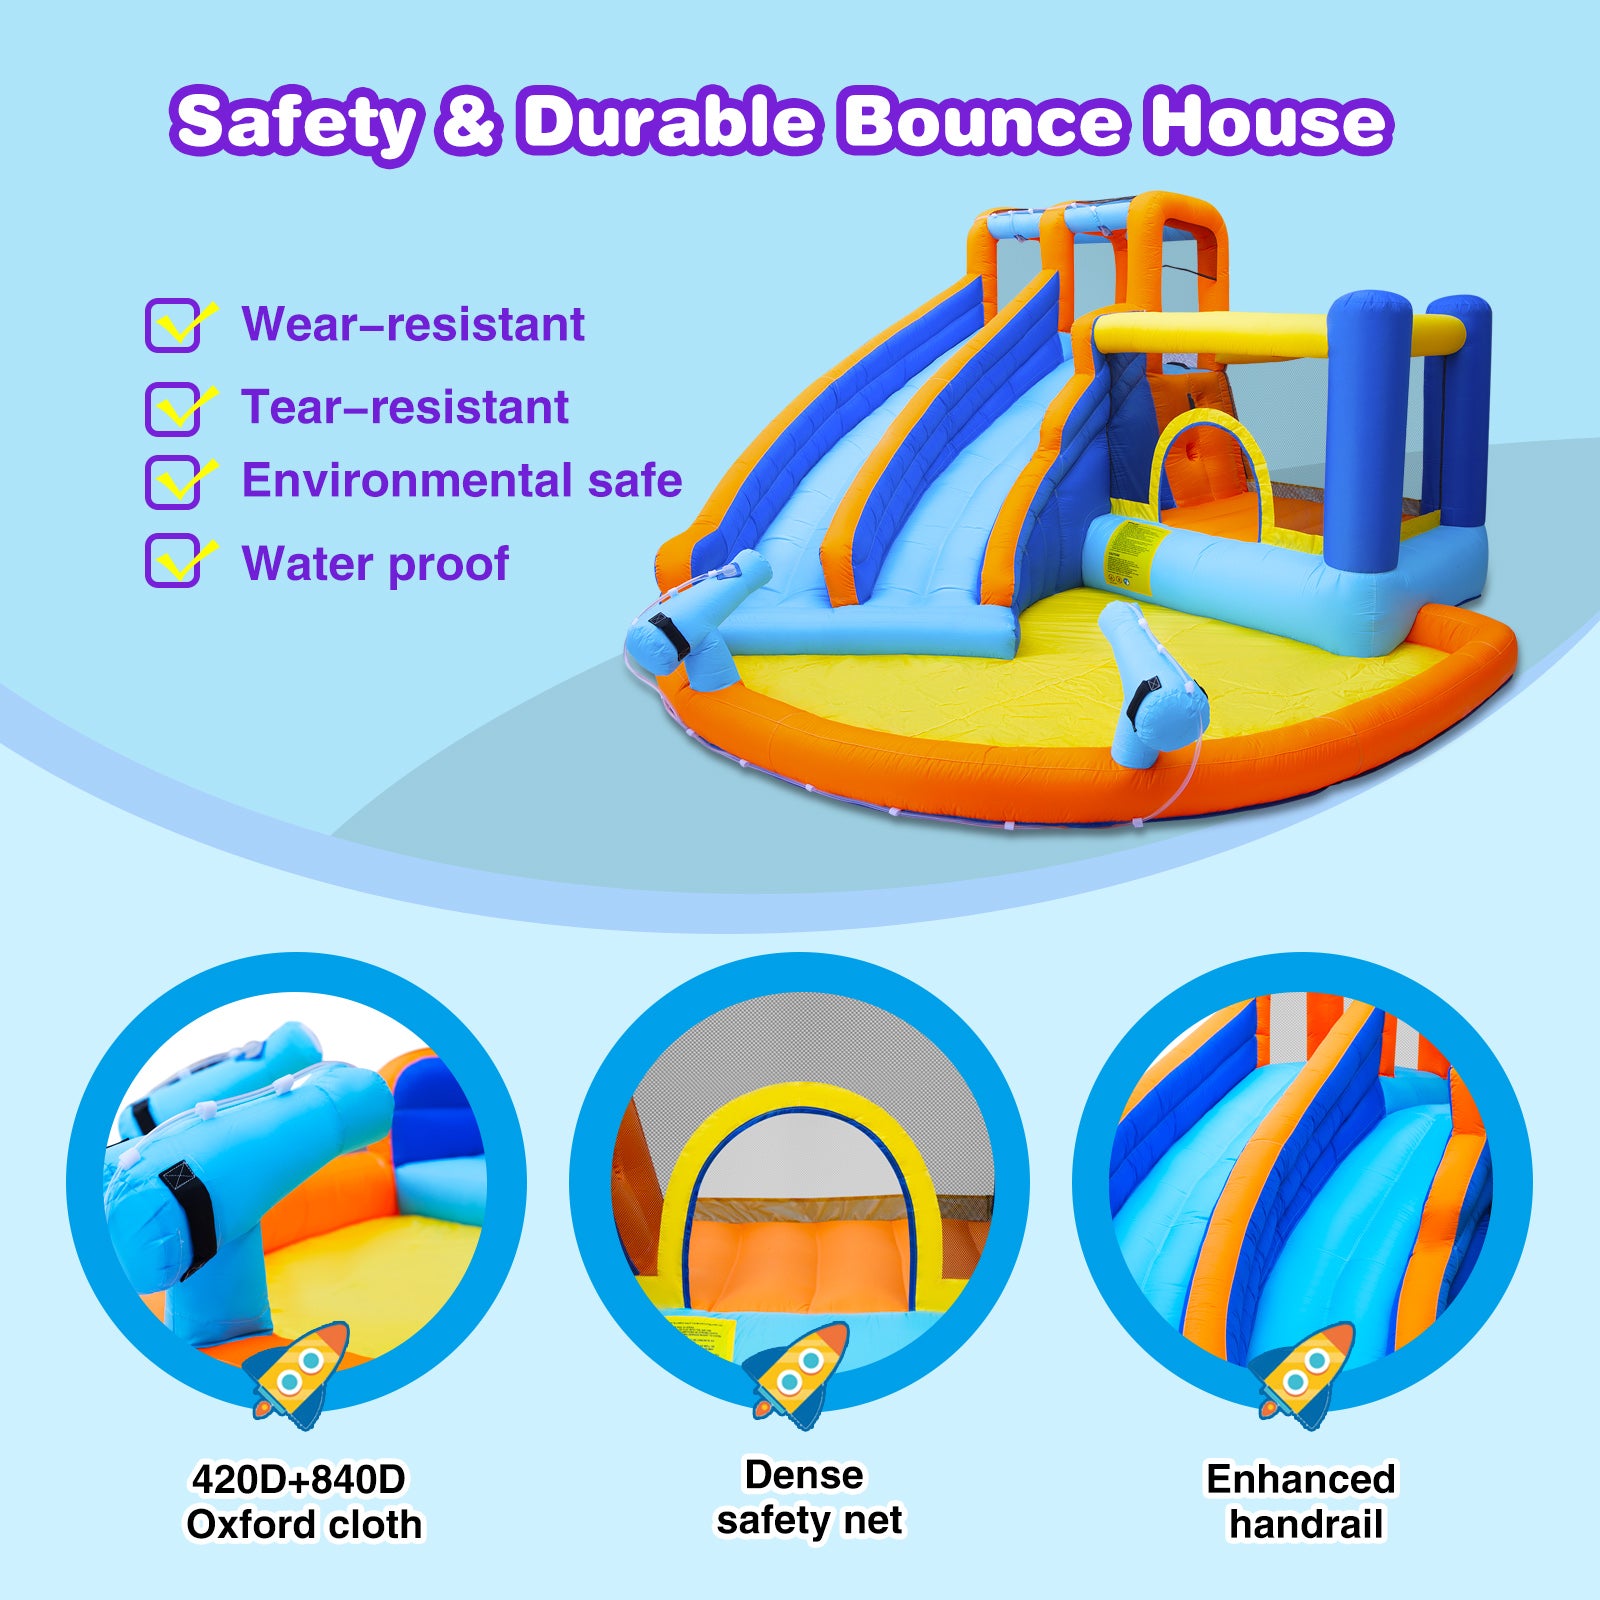 #1201 Inflatable Water Slide Bounce House,Giant Water Park, Double Slide Bouncer Castle w/Splash Pool, Jump Area, Climbing Wall, 550W Air Blower for Kids Backyard Indoor Outdoor Use,Free Water Gun